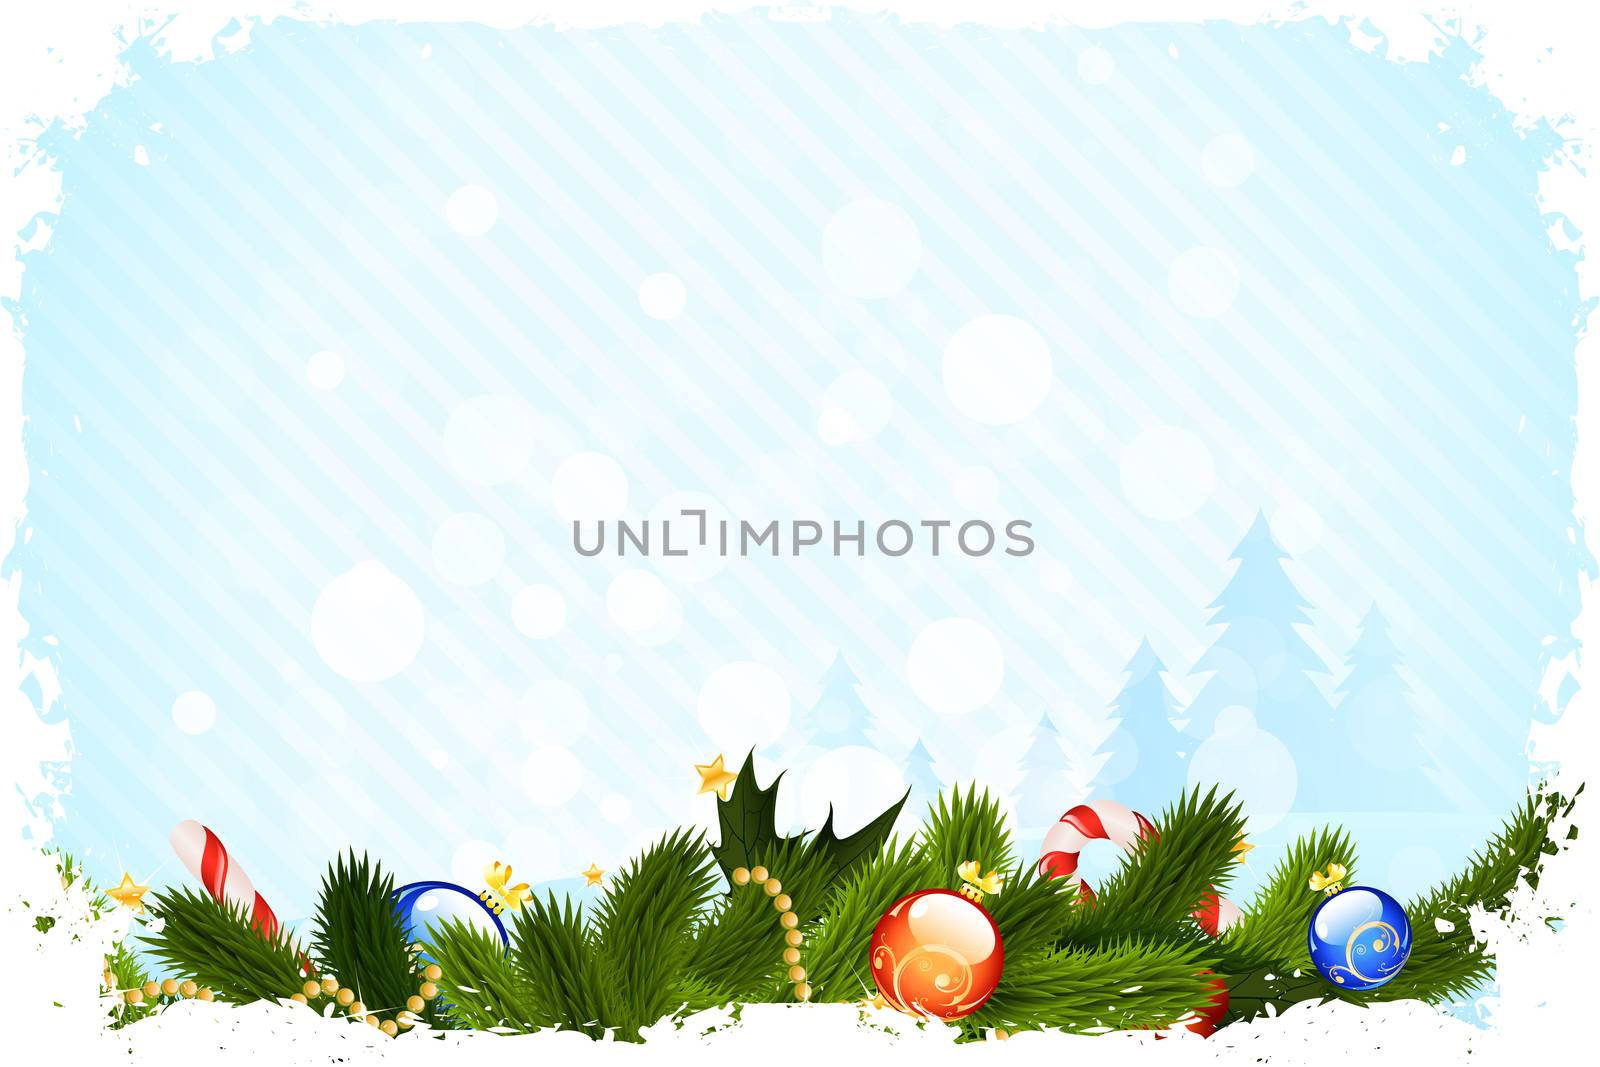 Grungy Christmas Card with Christmas Trees and Decorations